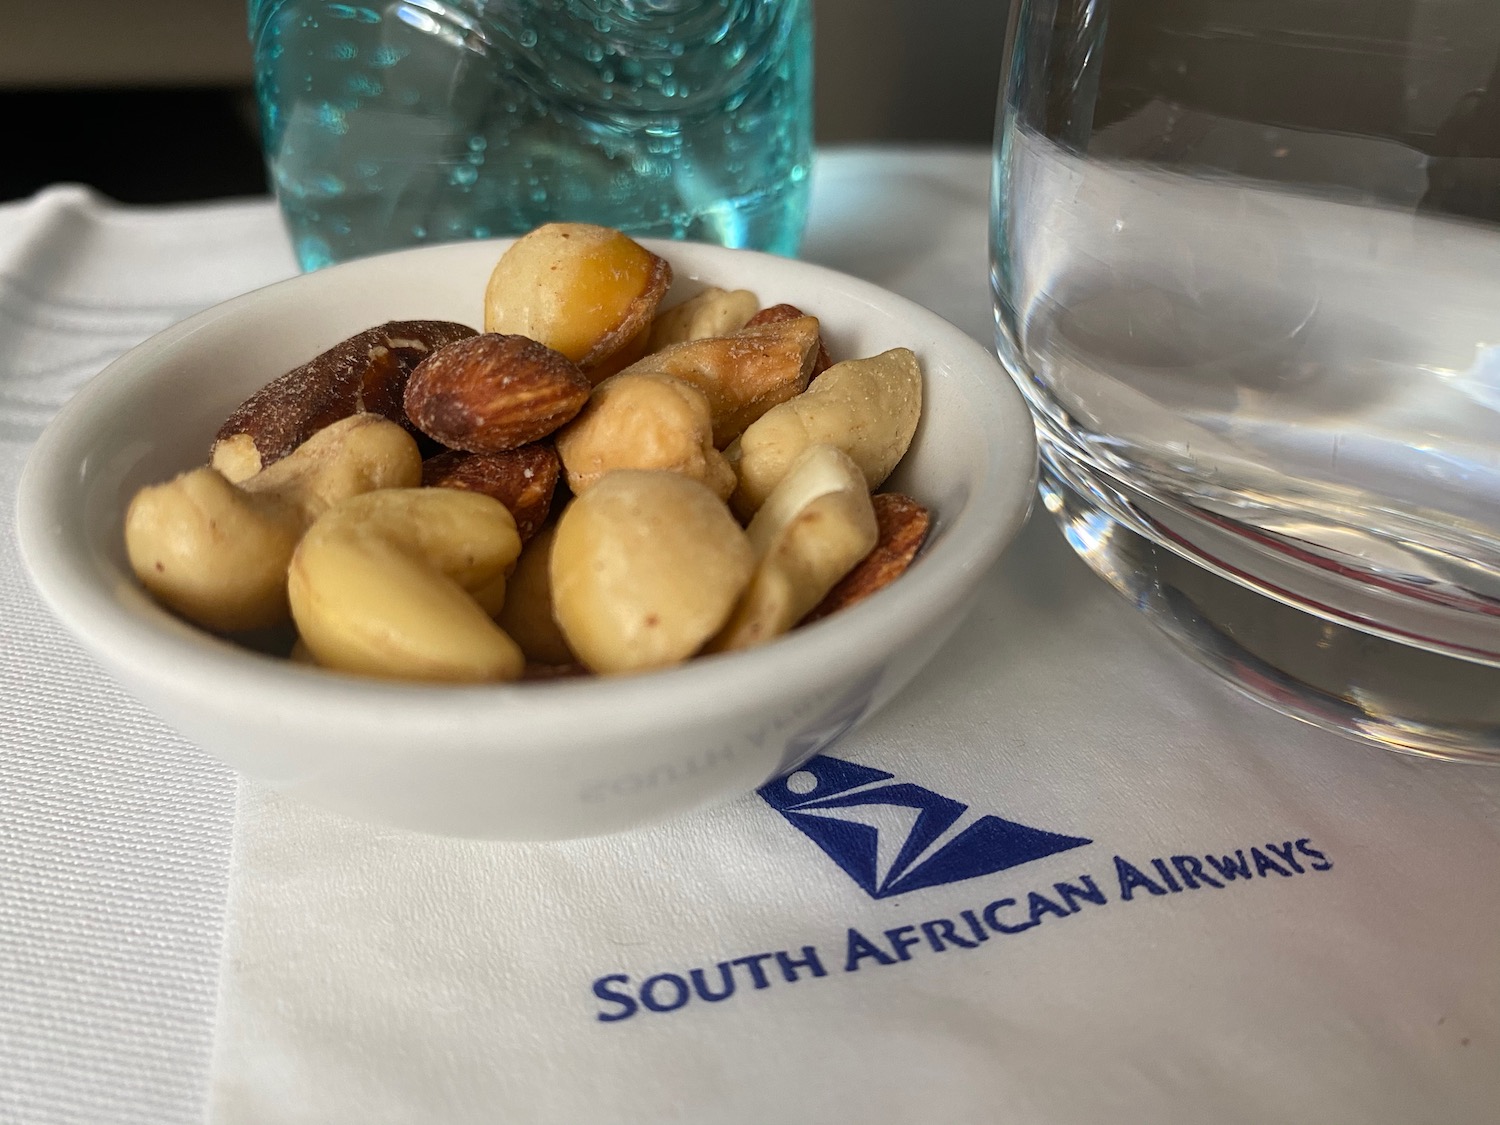 a bowl of nuts and a glass of water